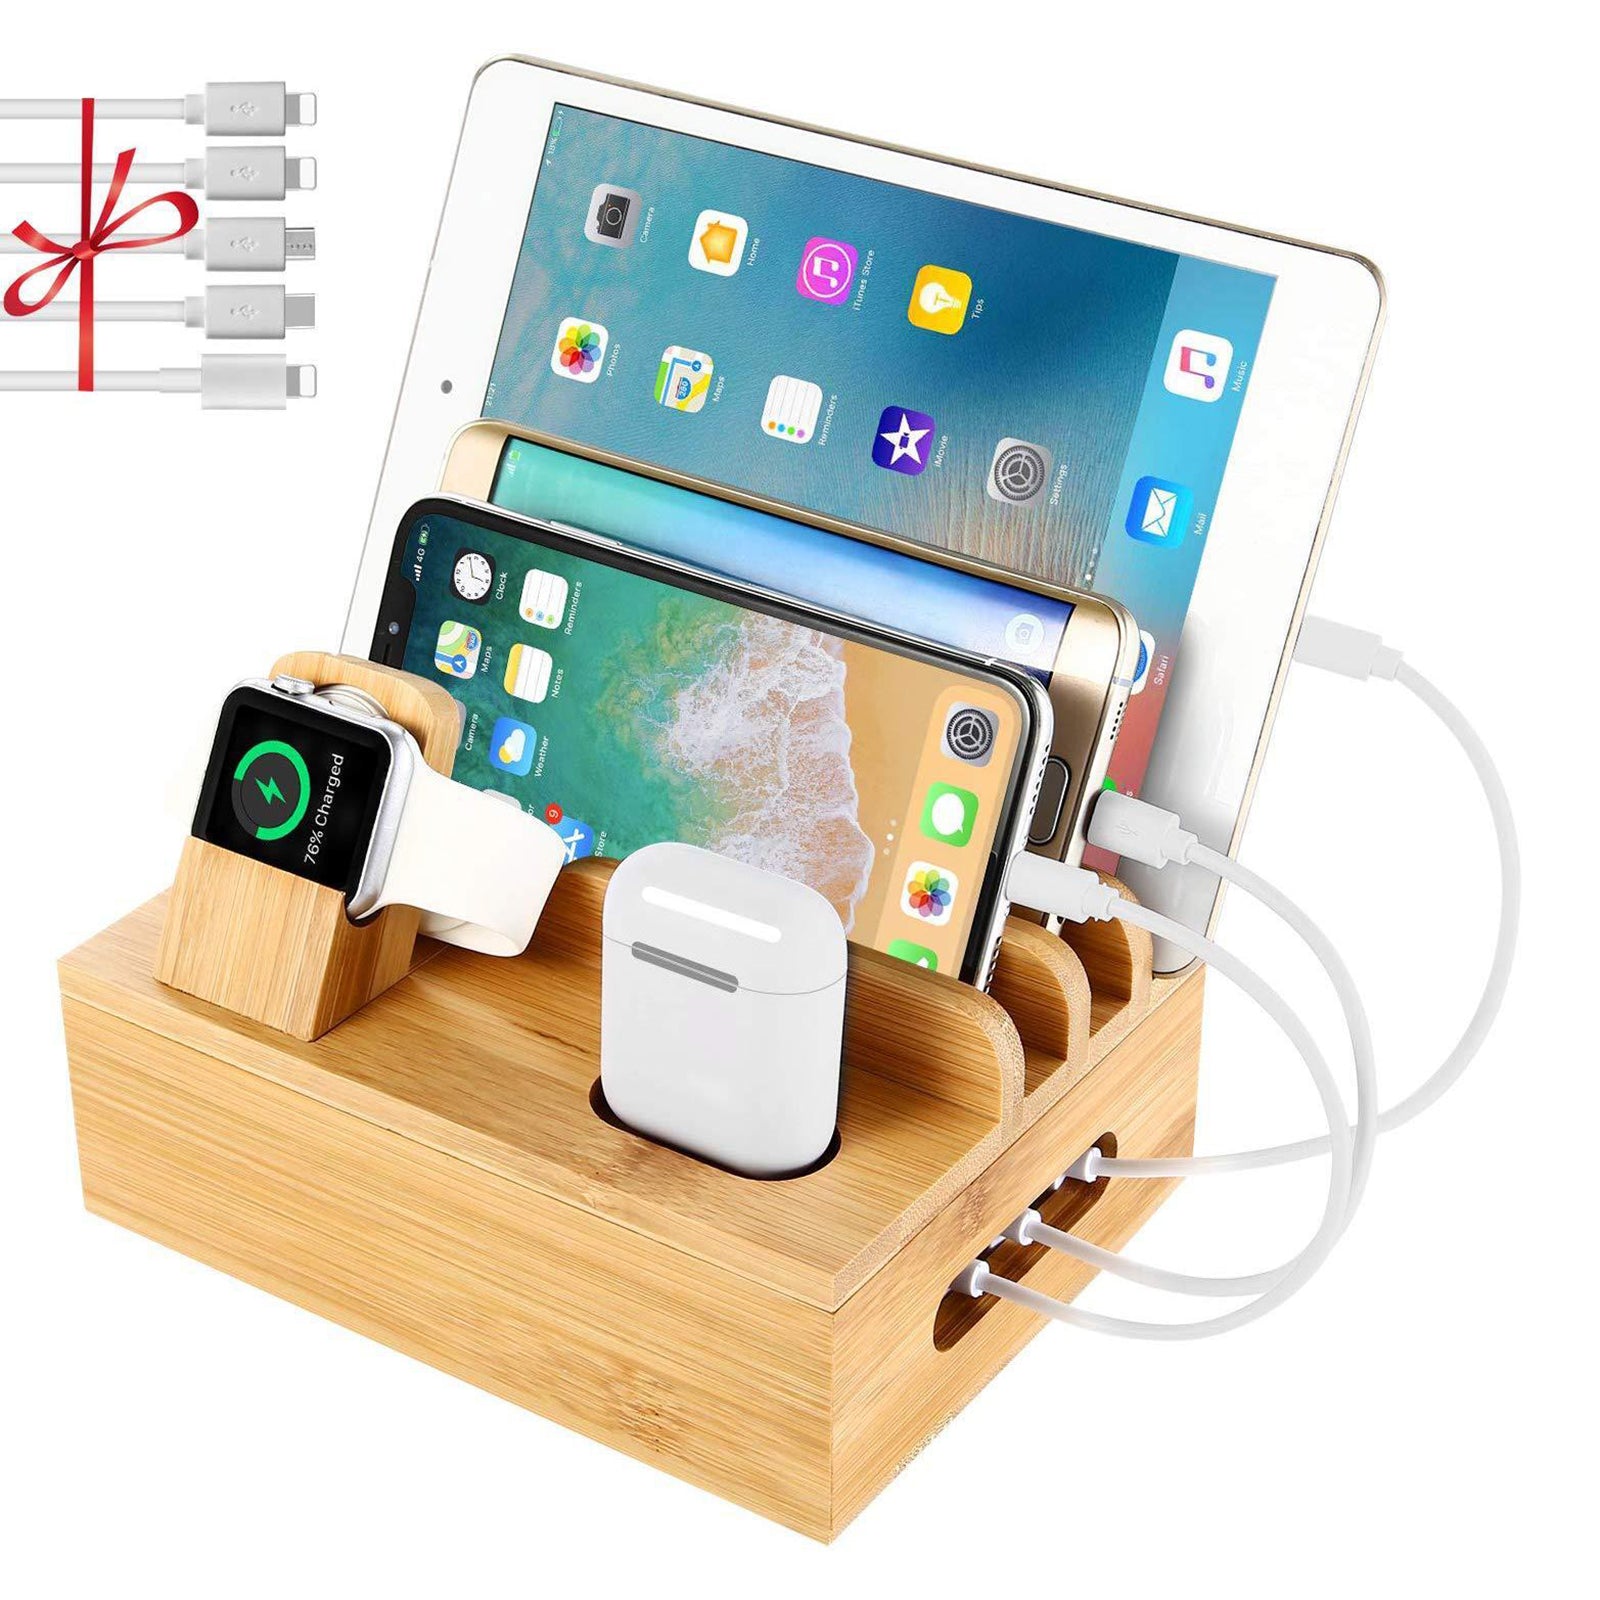 Mobile Charging Dock Station Holder Stand Organizer For iWatch iPhone 11 12